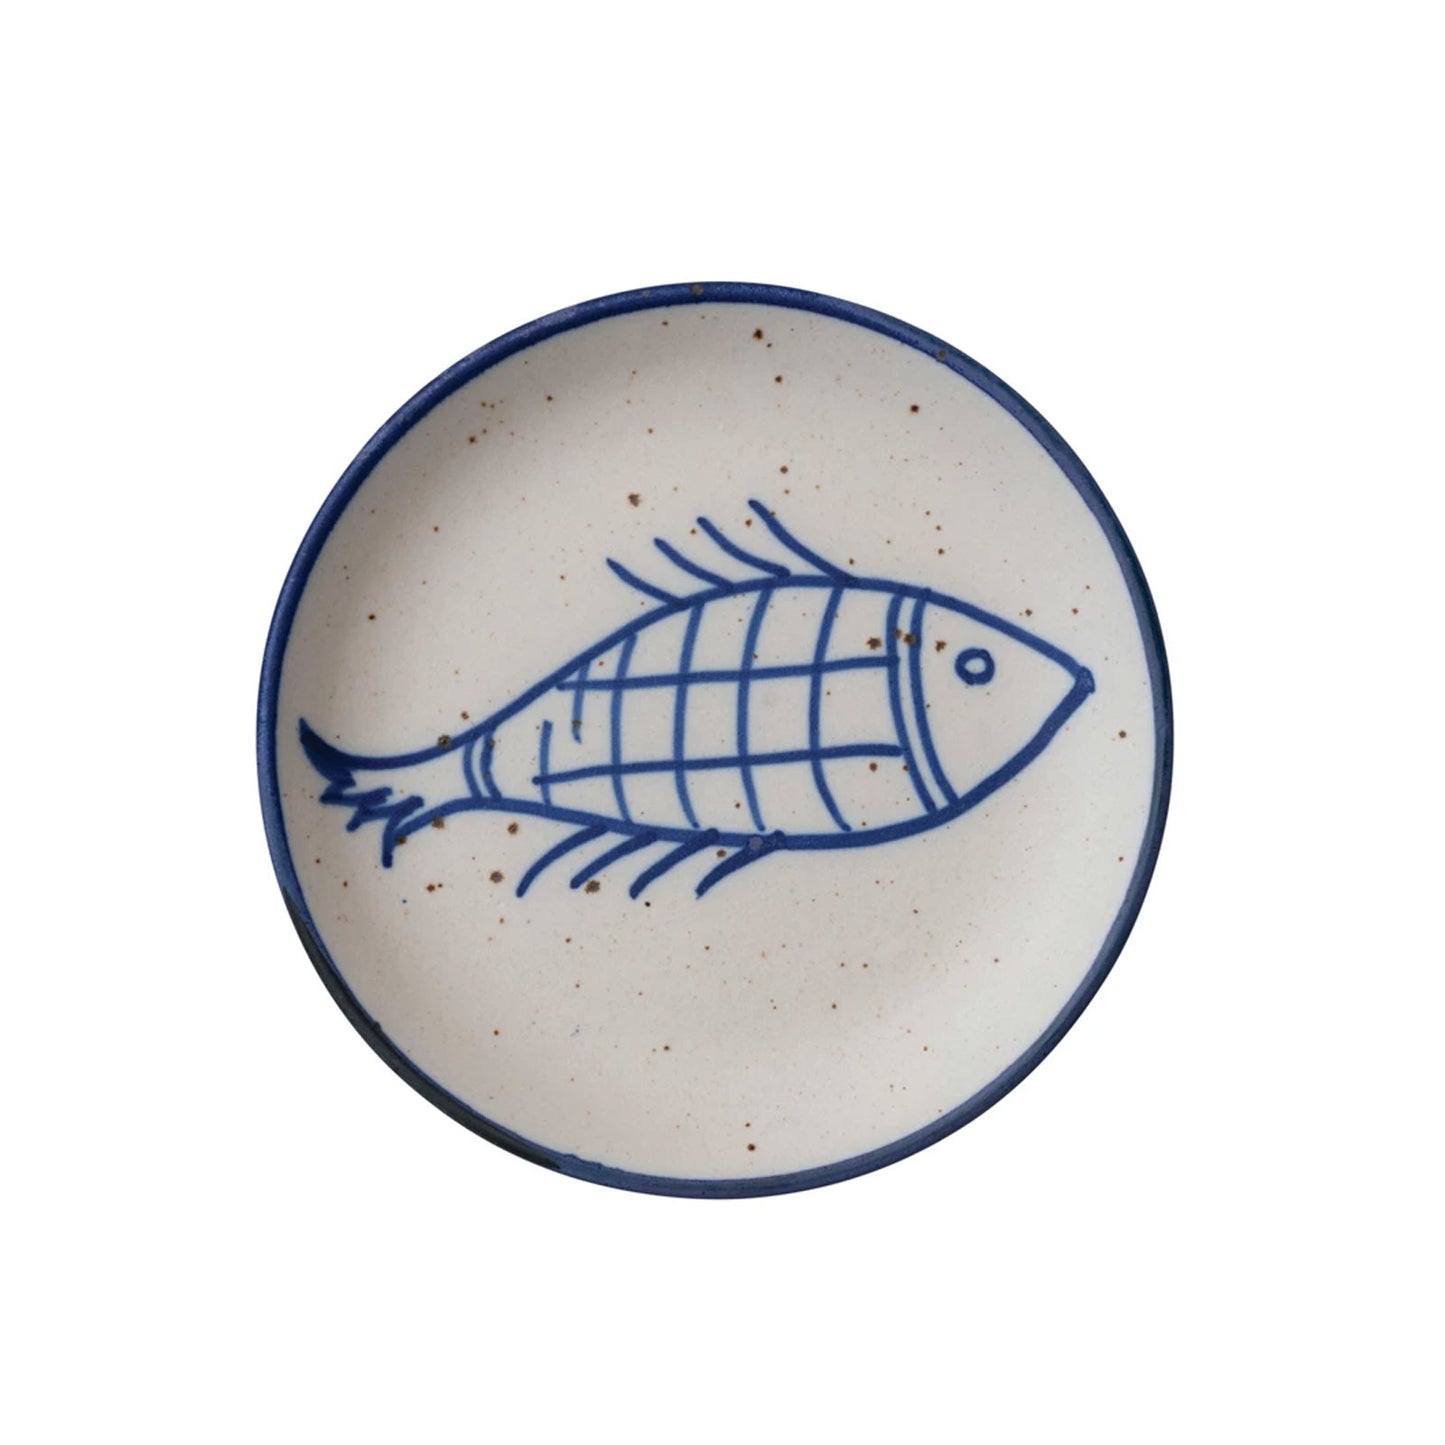 Hand-Painted Stoneware Plate with Fish in Blue & Cream Speckled